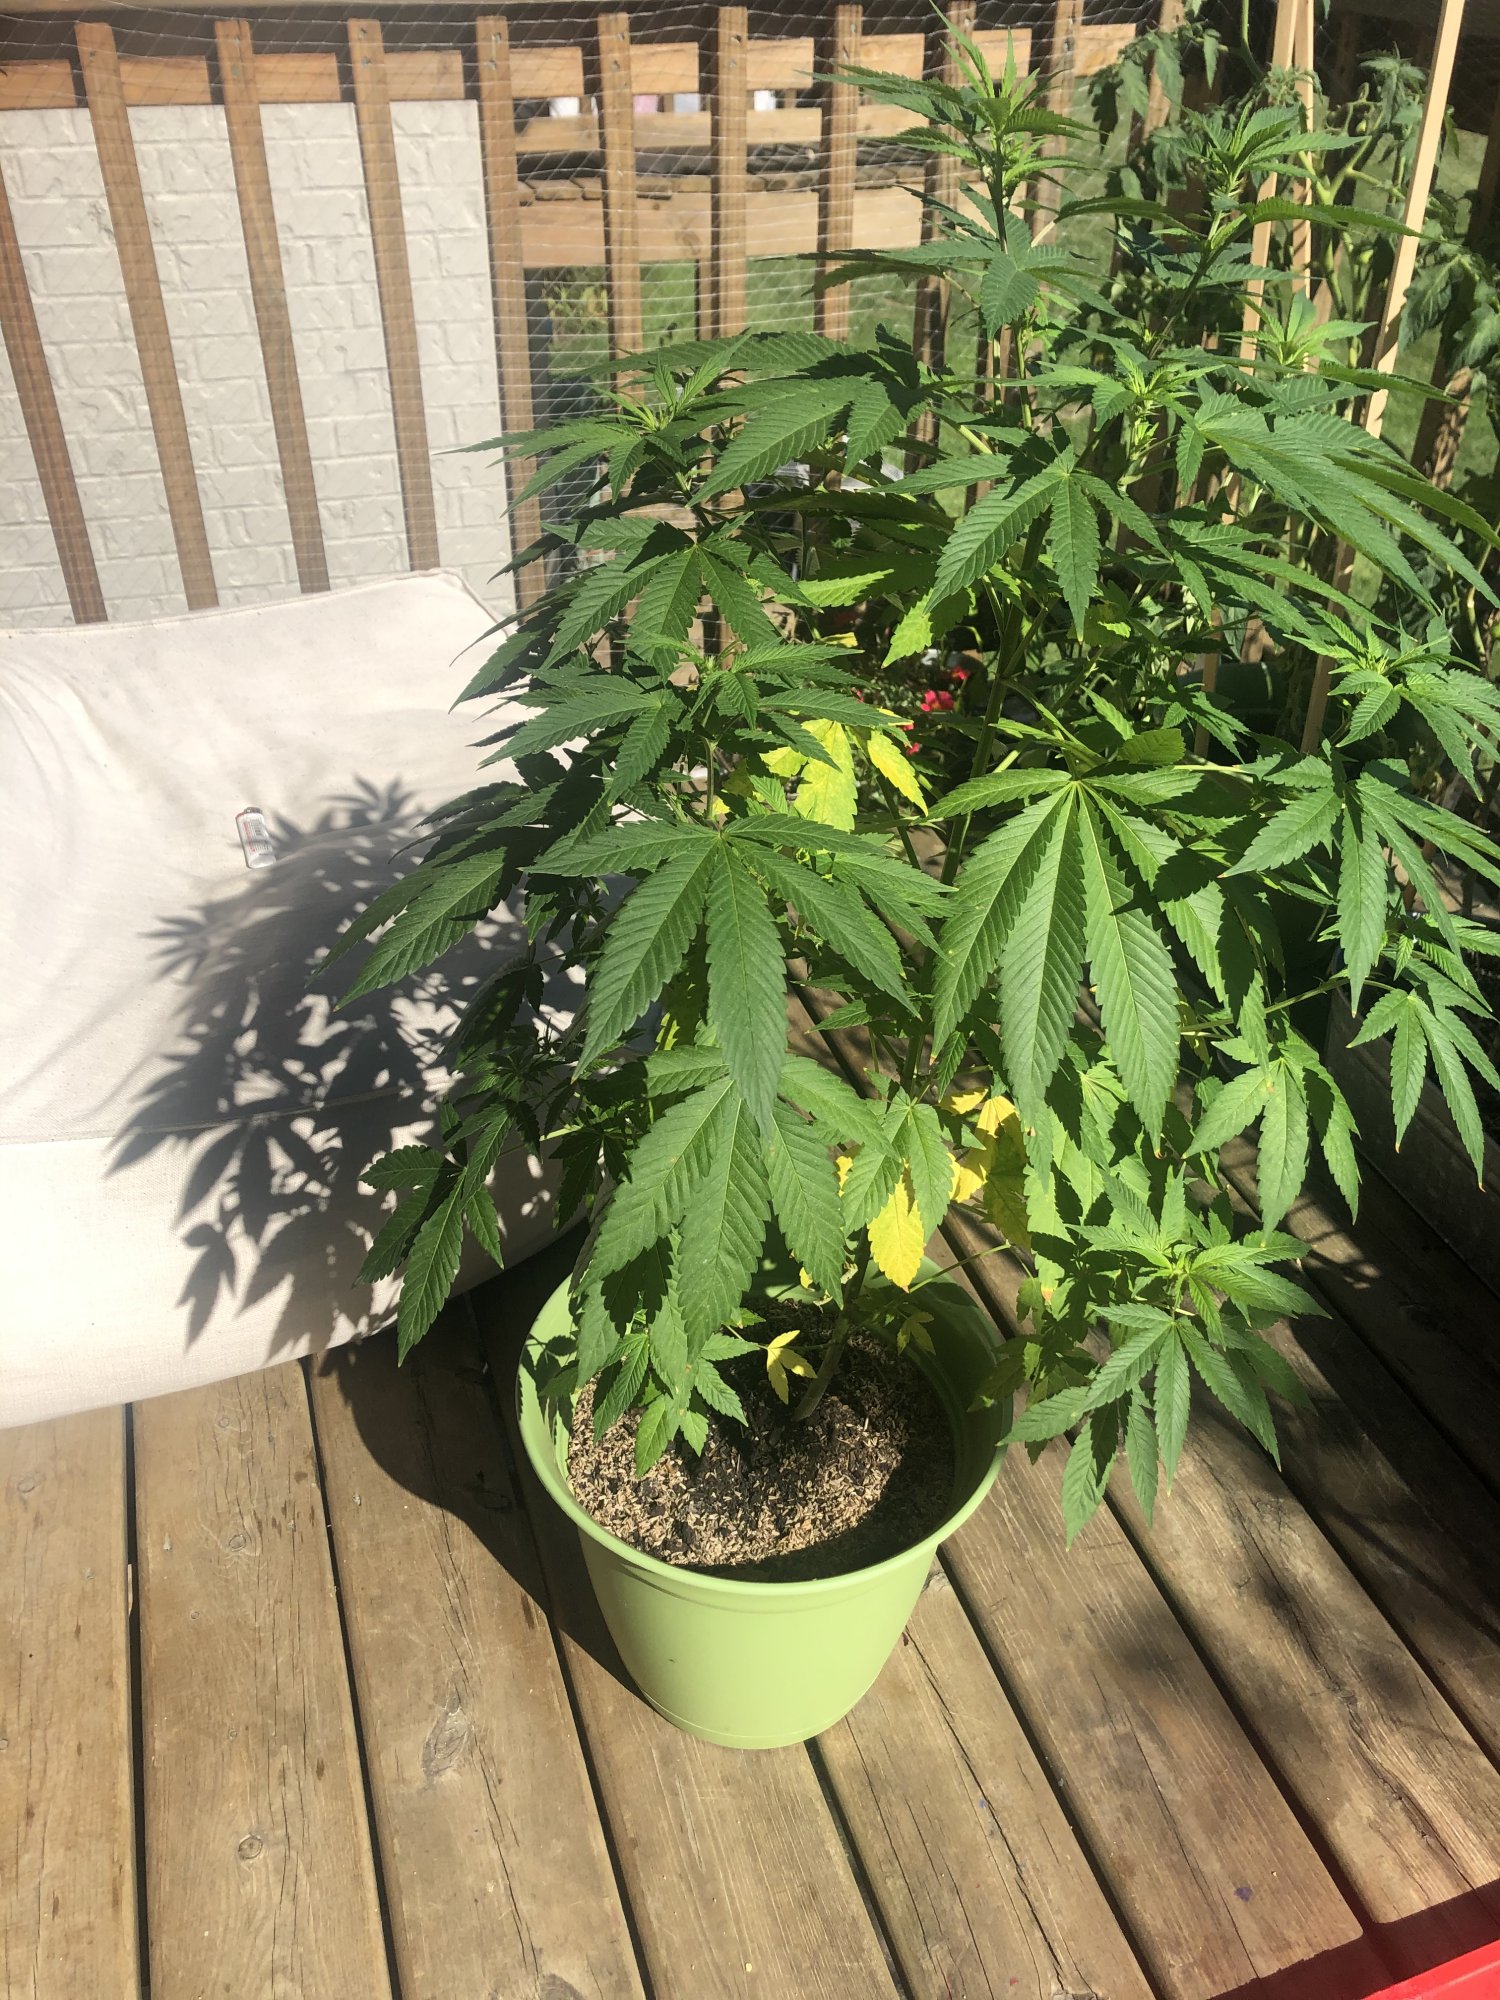 Yellowing leaves on my outdoor plant 2